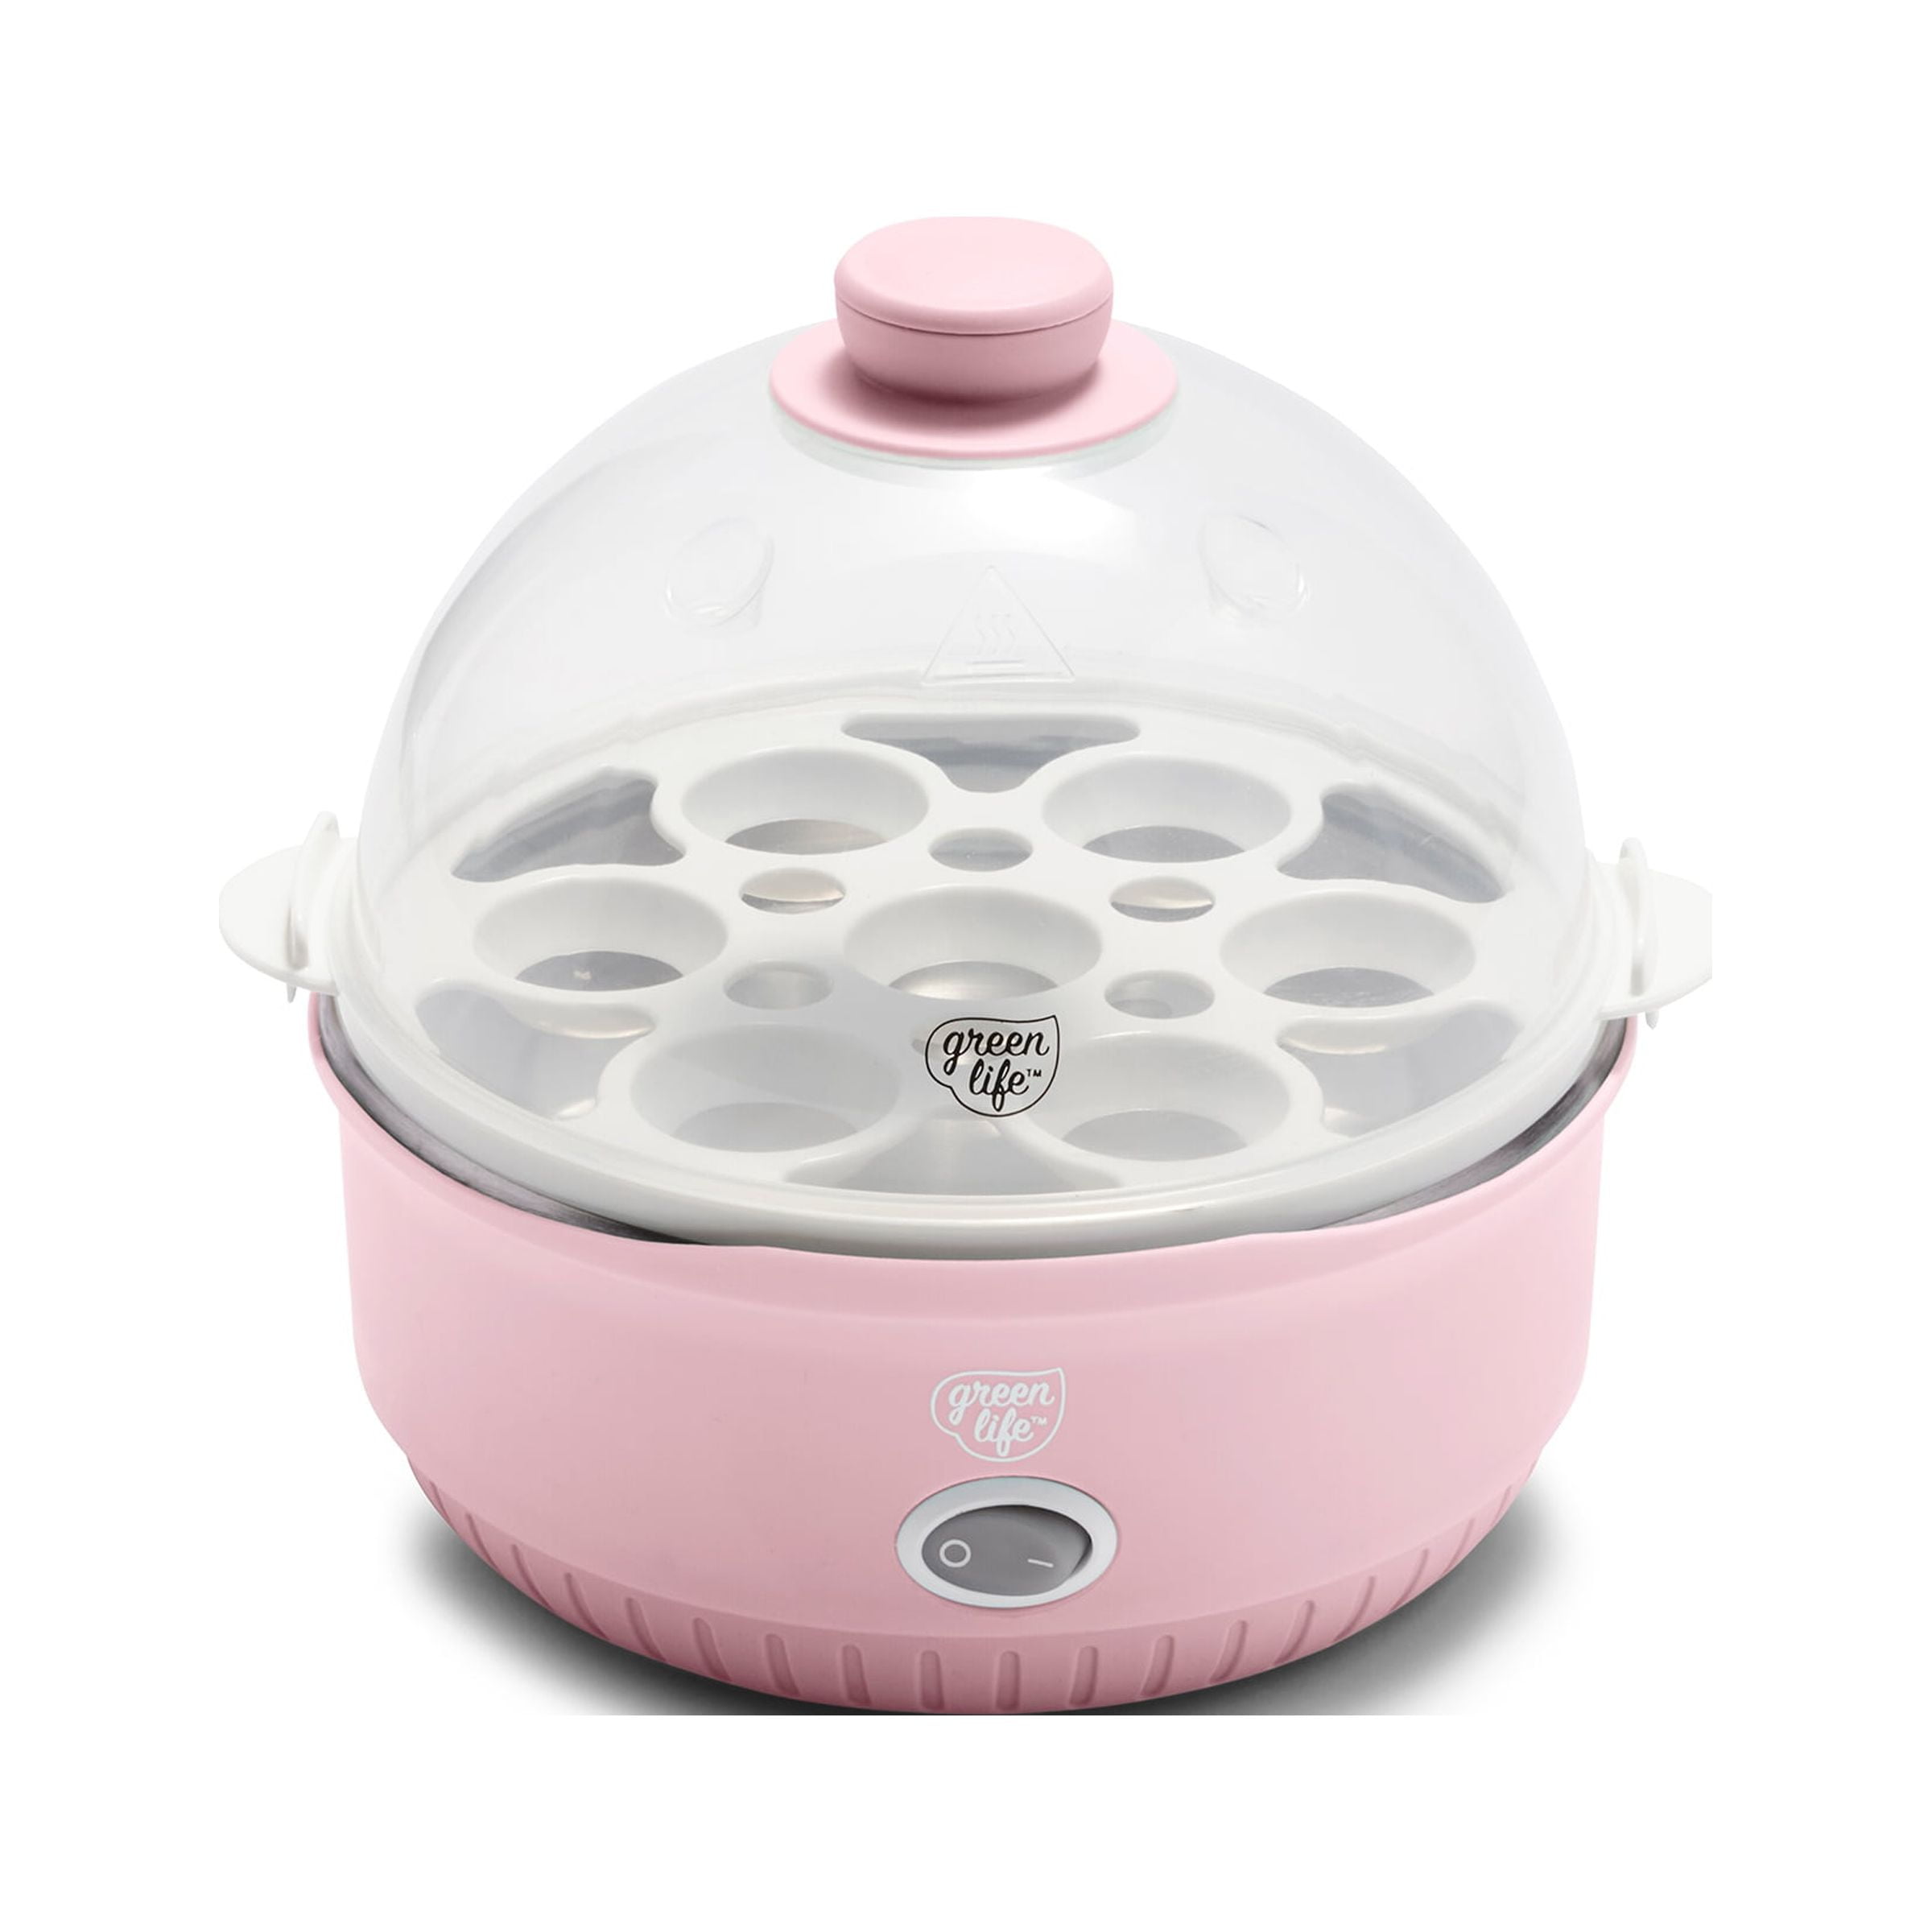 GreenLife Electric Egg Cooker - Pink